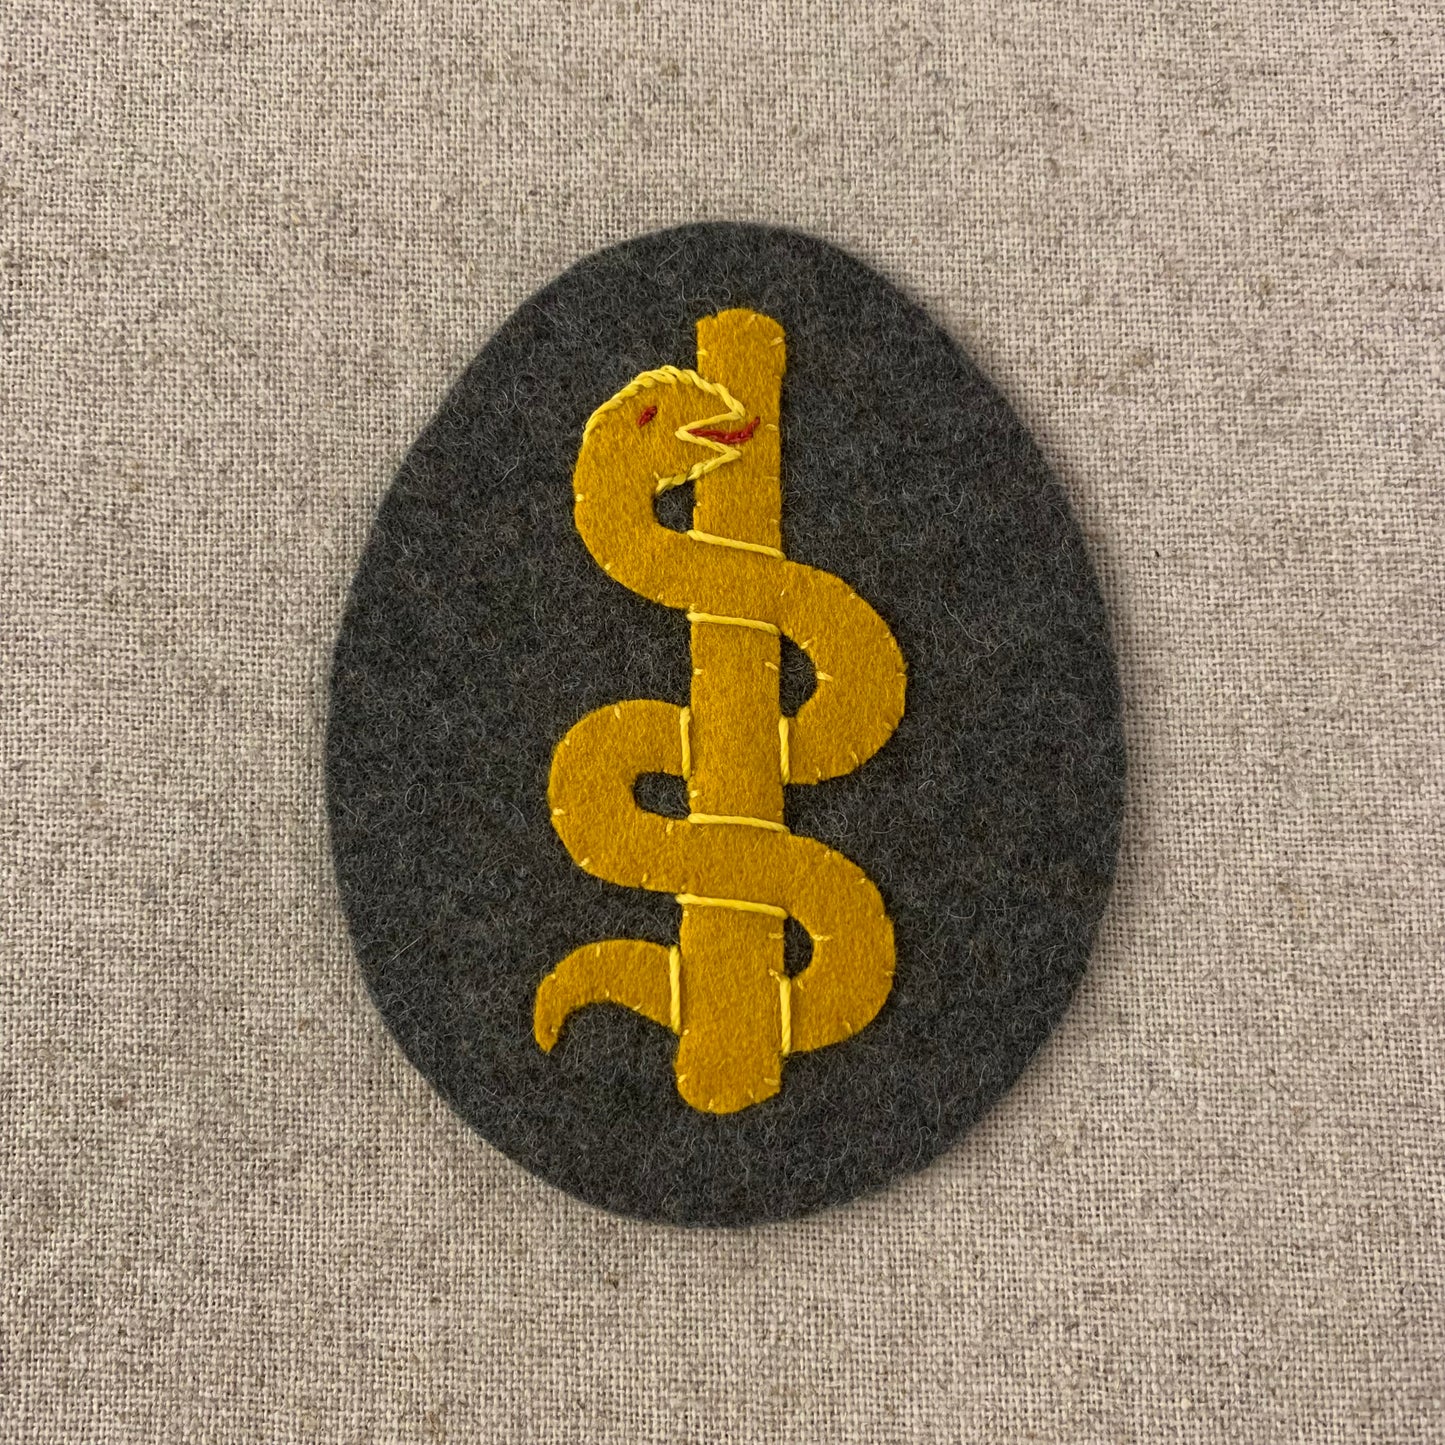 WW1 and Weimar medical trade badge